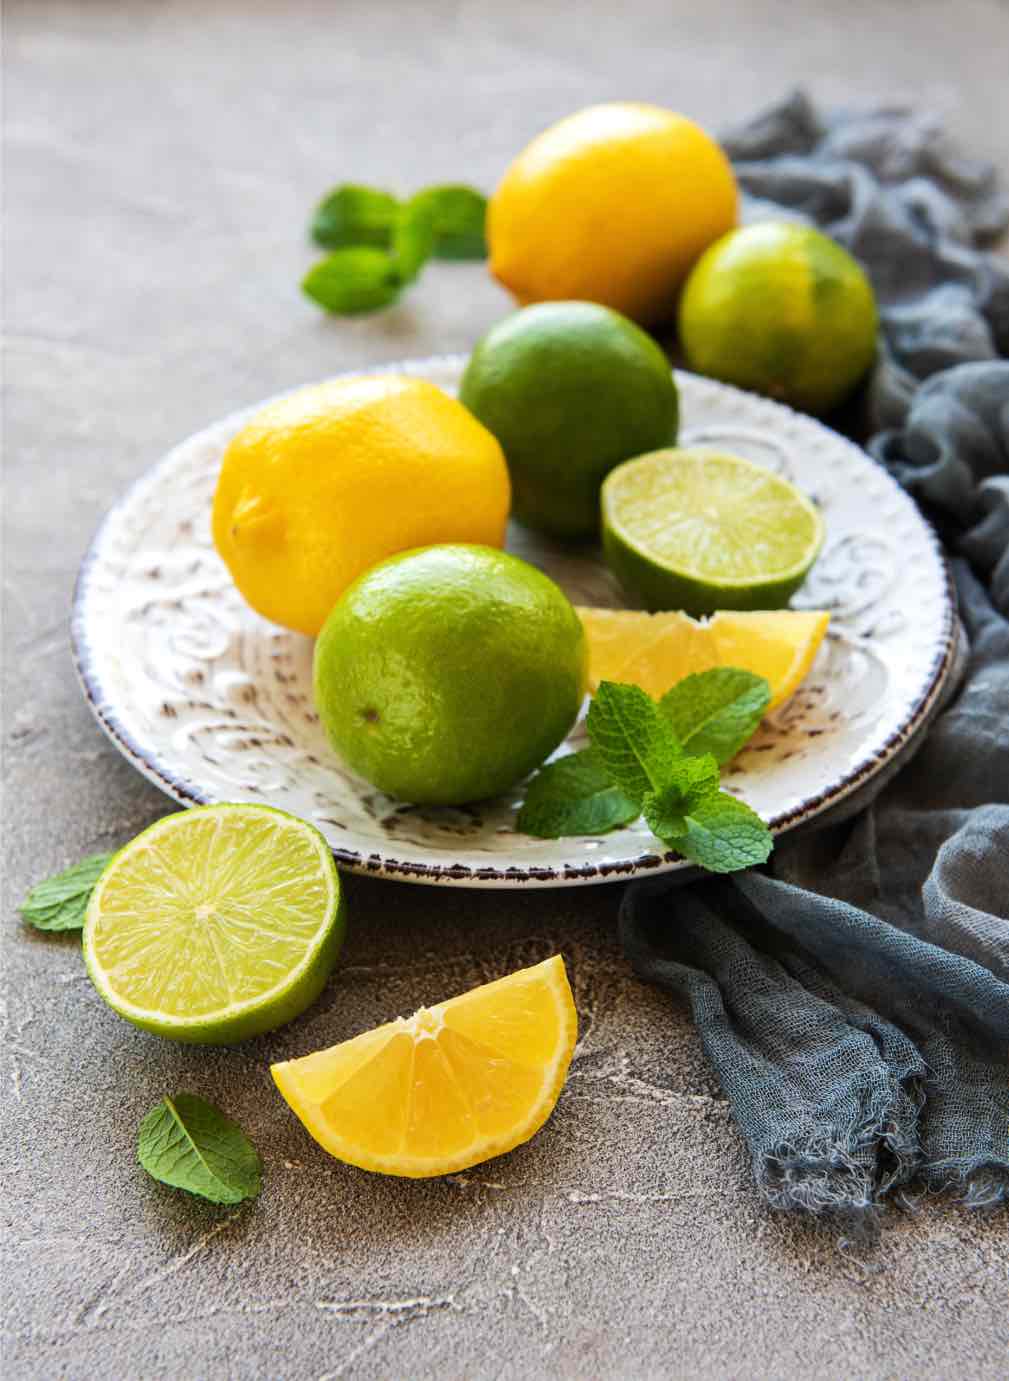 Lemons and limes are great for humans, but not for dogs - learn more with Dog Training Elite Dallas Fort Worth (DFW)!